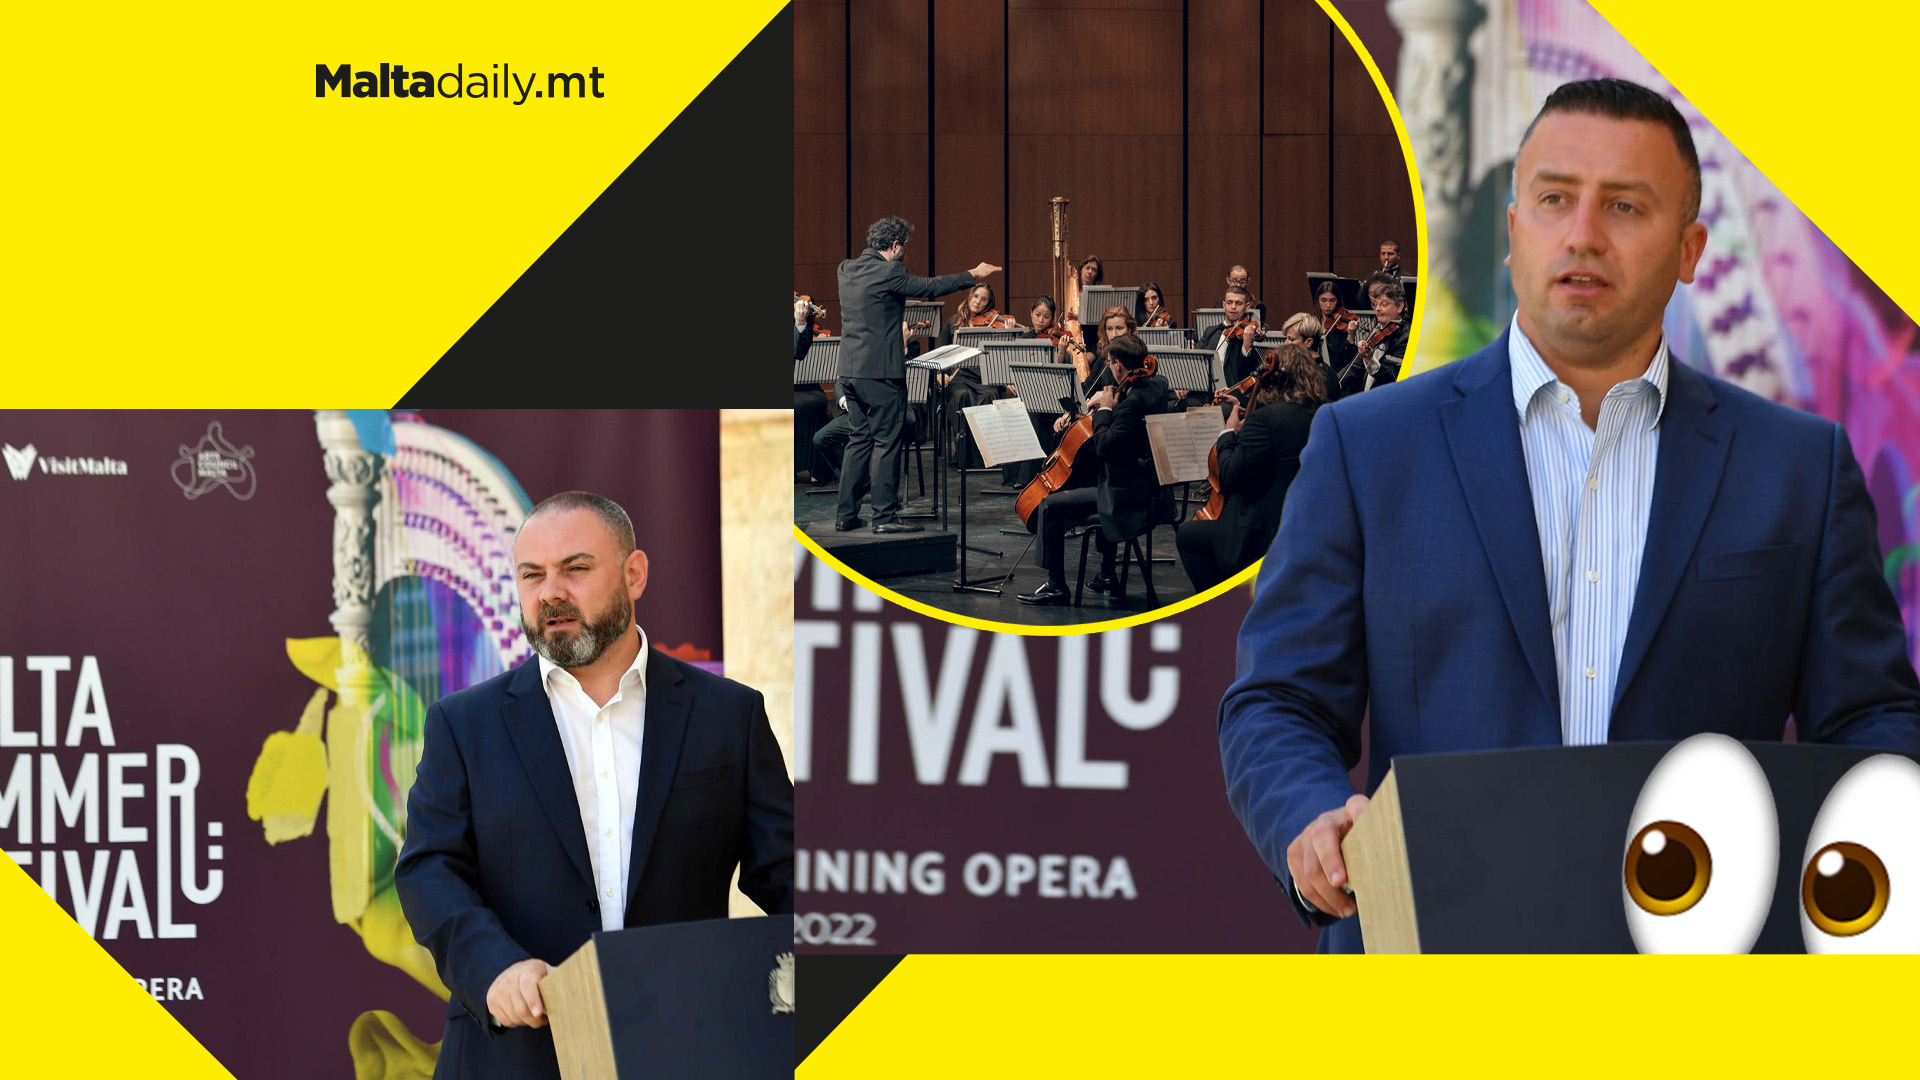 Malta Philarmonic Orchestra launches summer festival presenting opera in an innovative manner